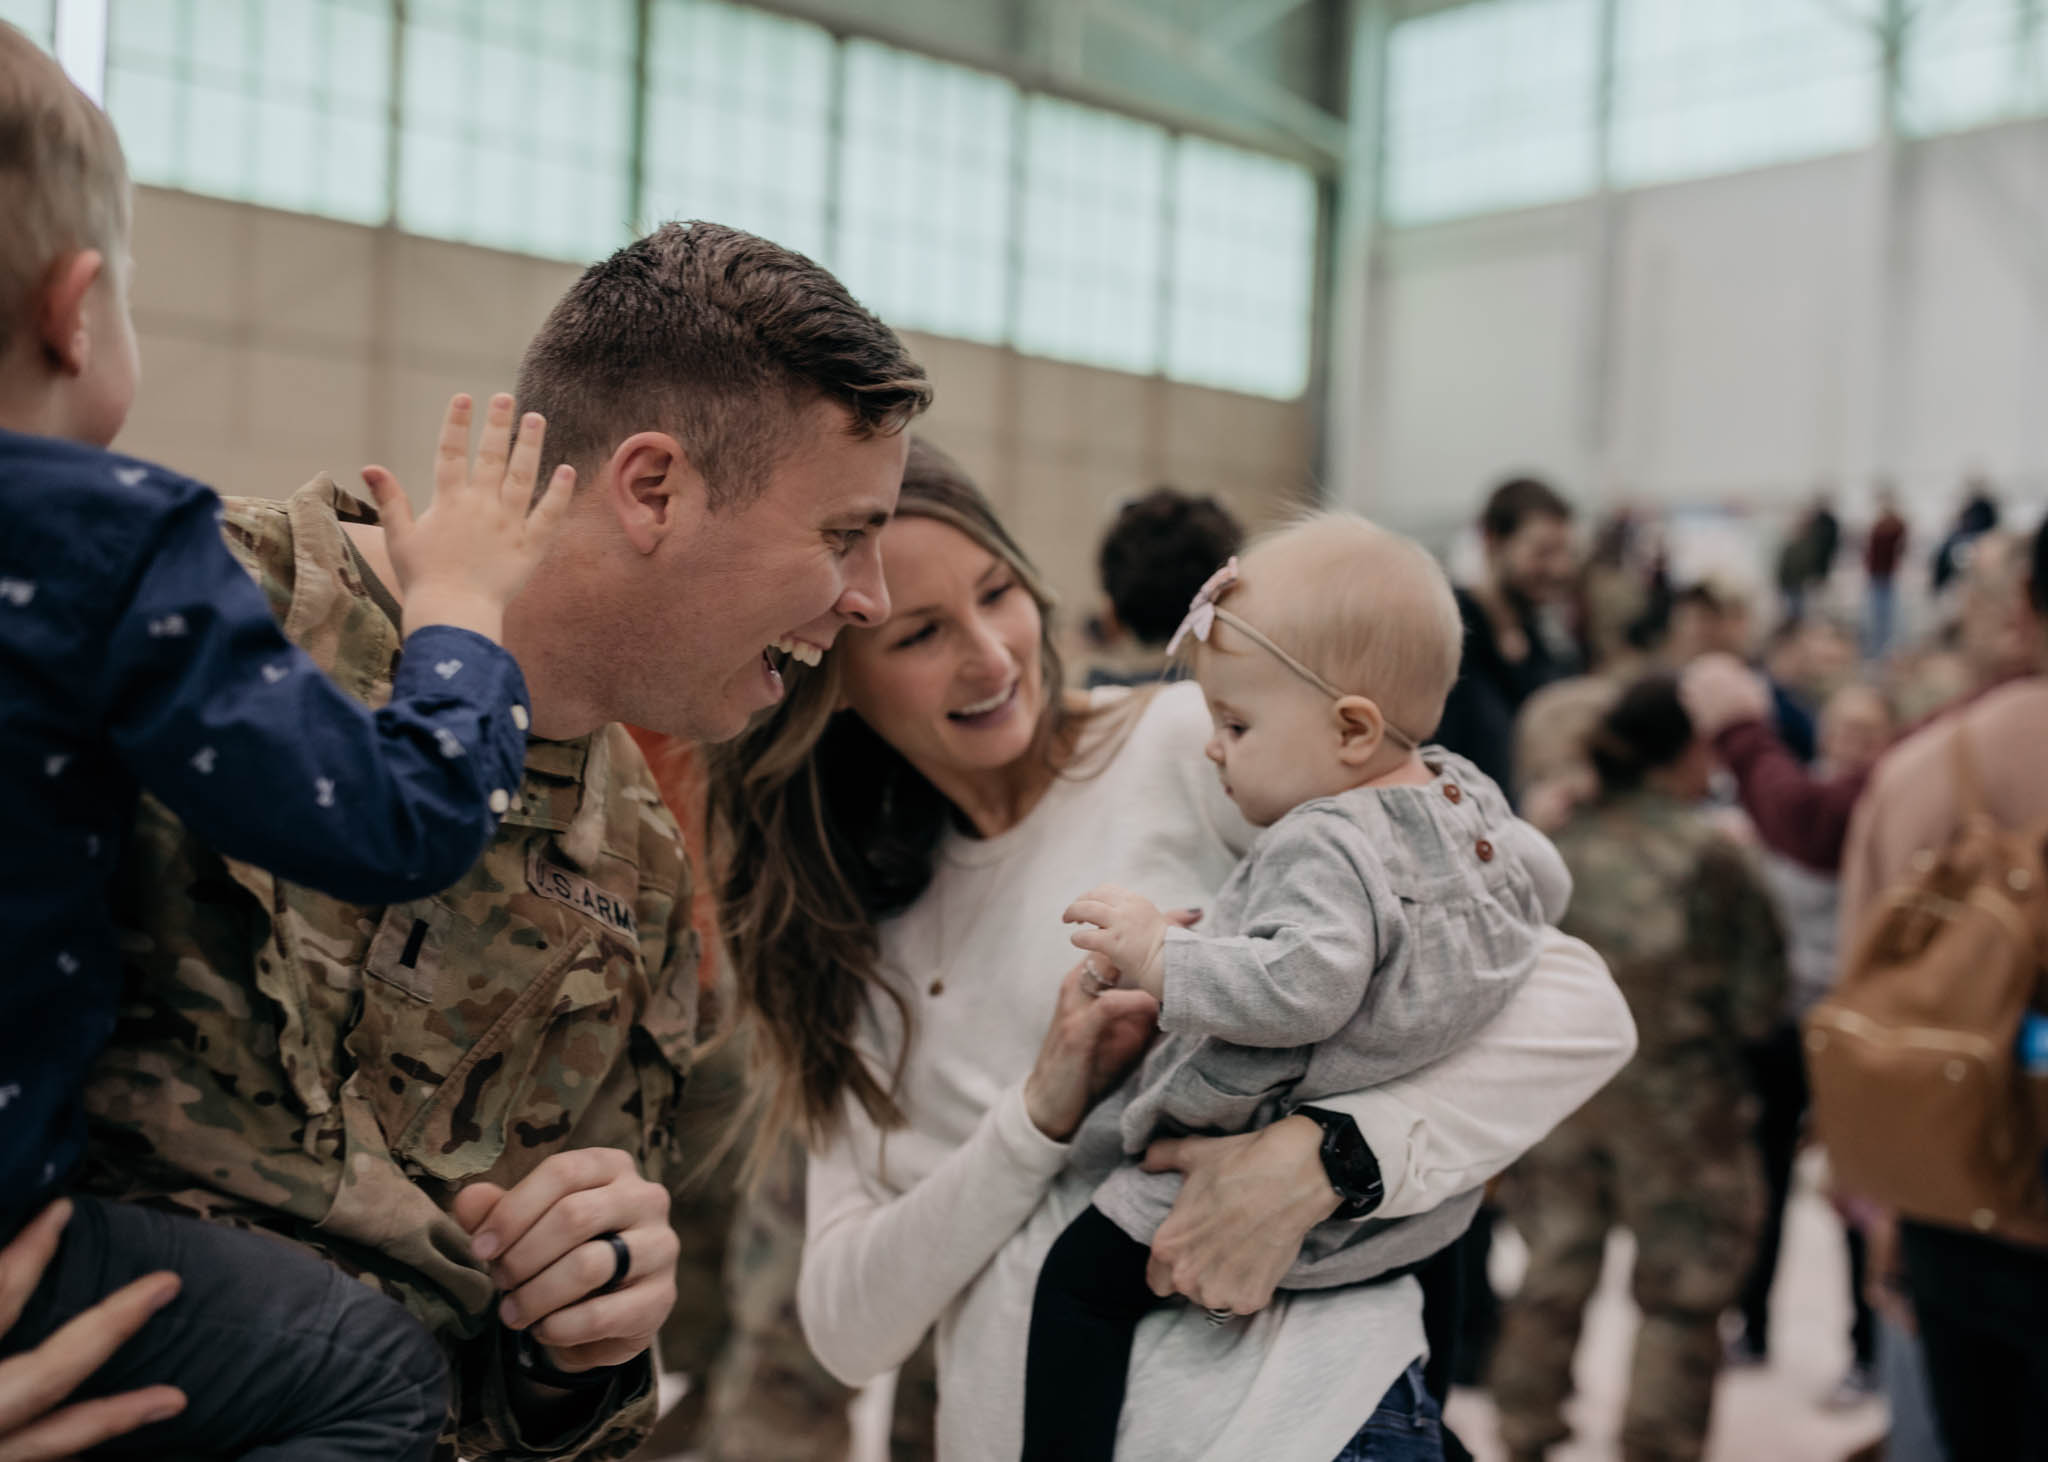 Soldier Reuniting with Family